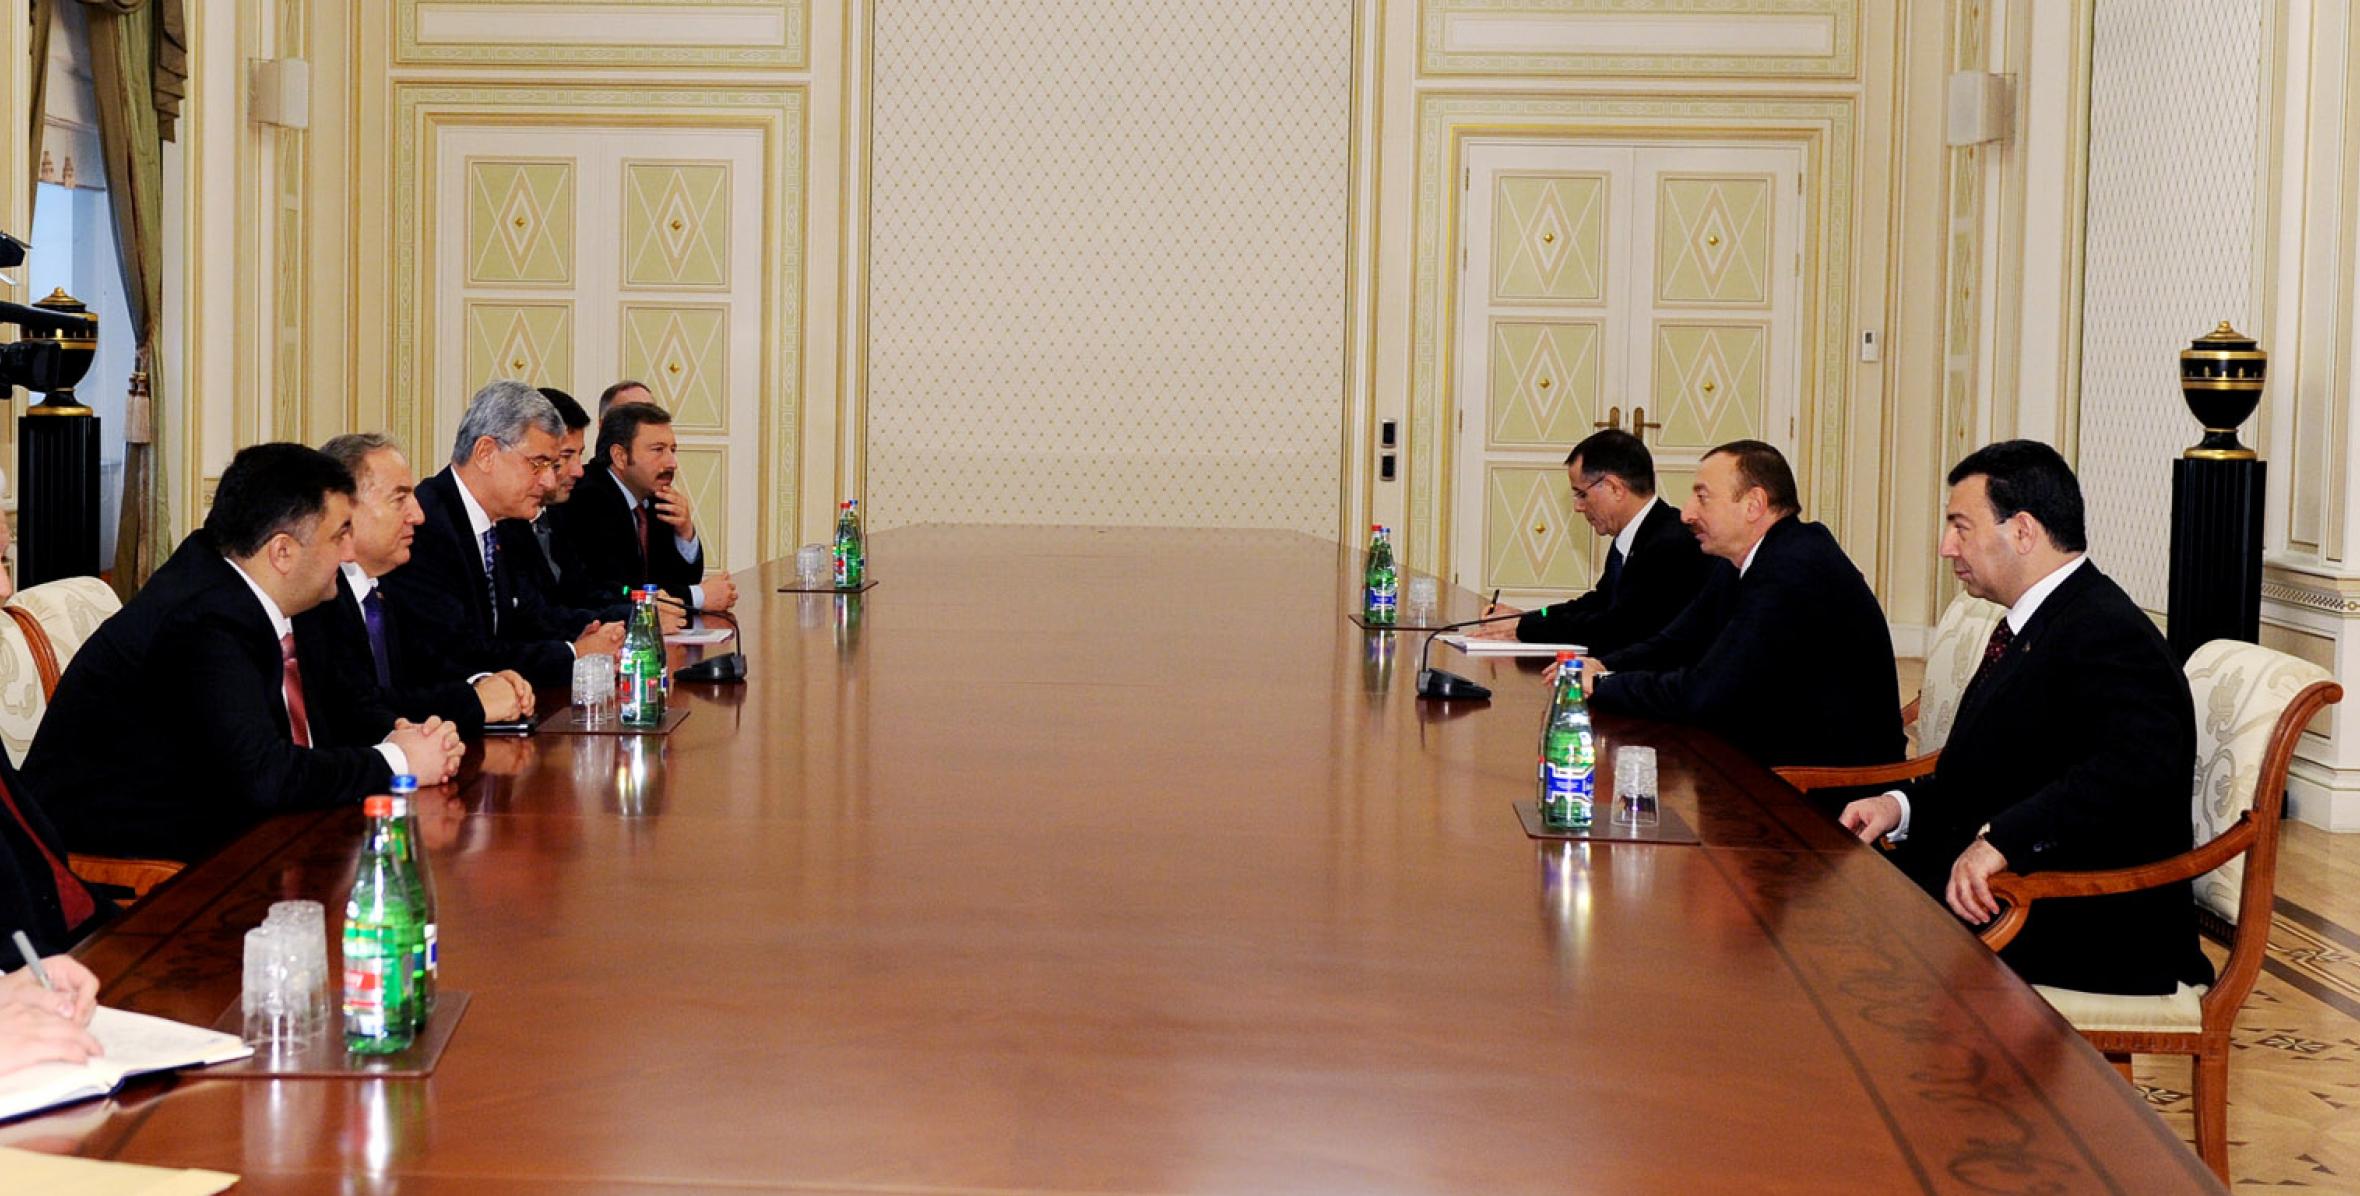 Ilham Aliyev received a delegation led by the Chairman of the Turkish Parliament’s Foreign Affairs Committee